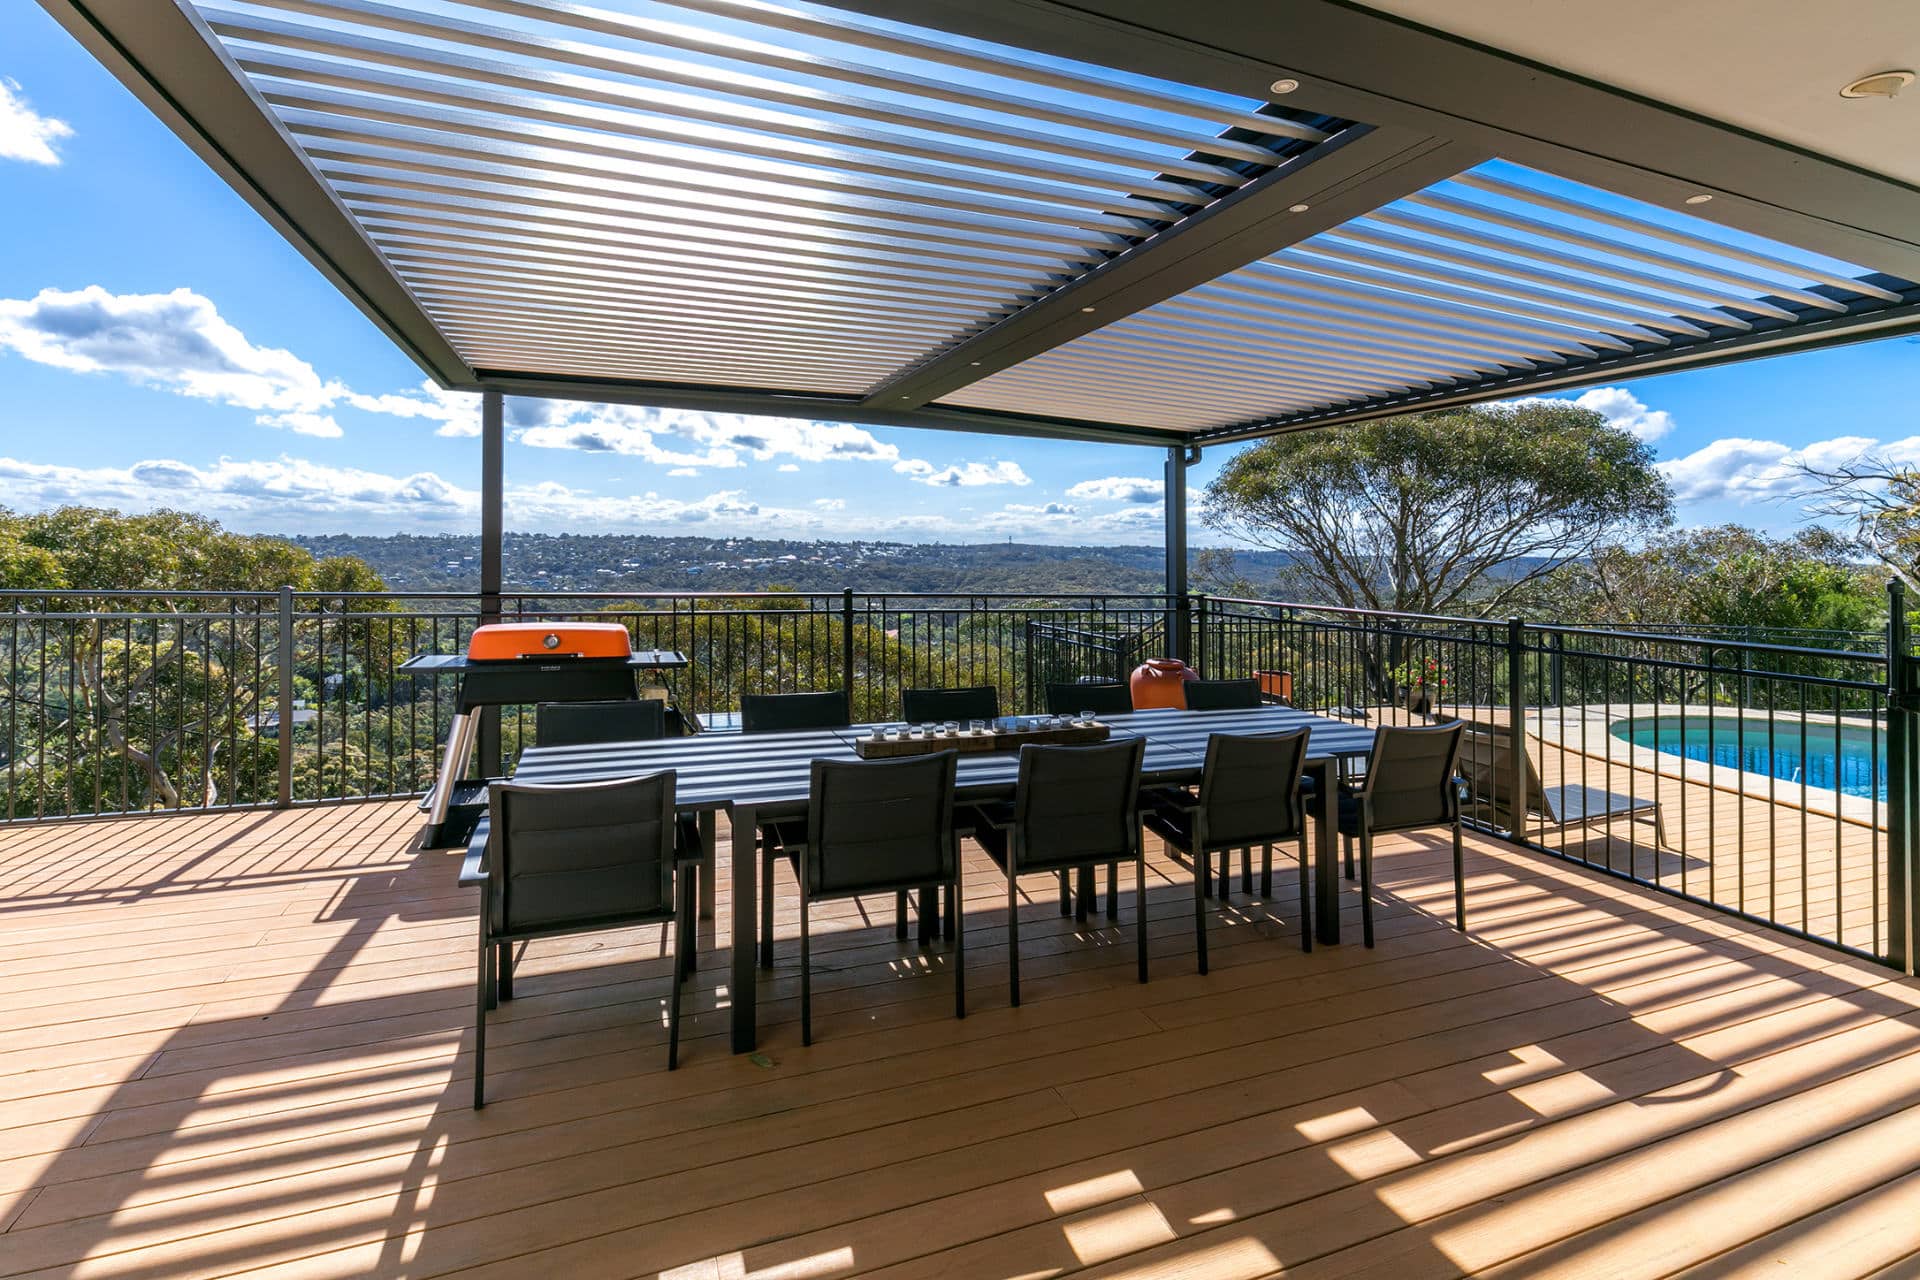 A Beacon Hill home with a new opening roof pergola showing a stunning view